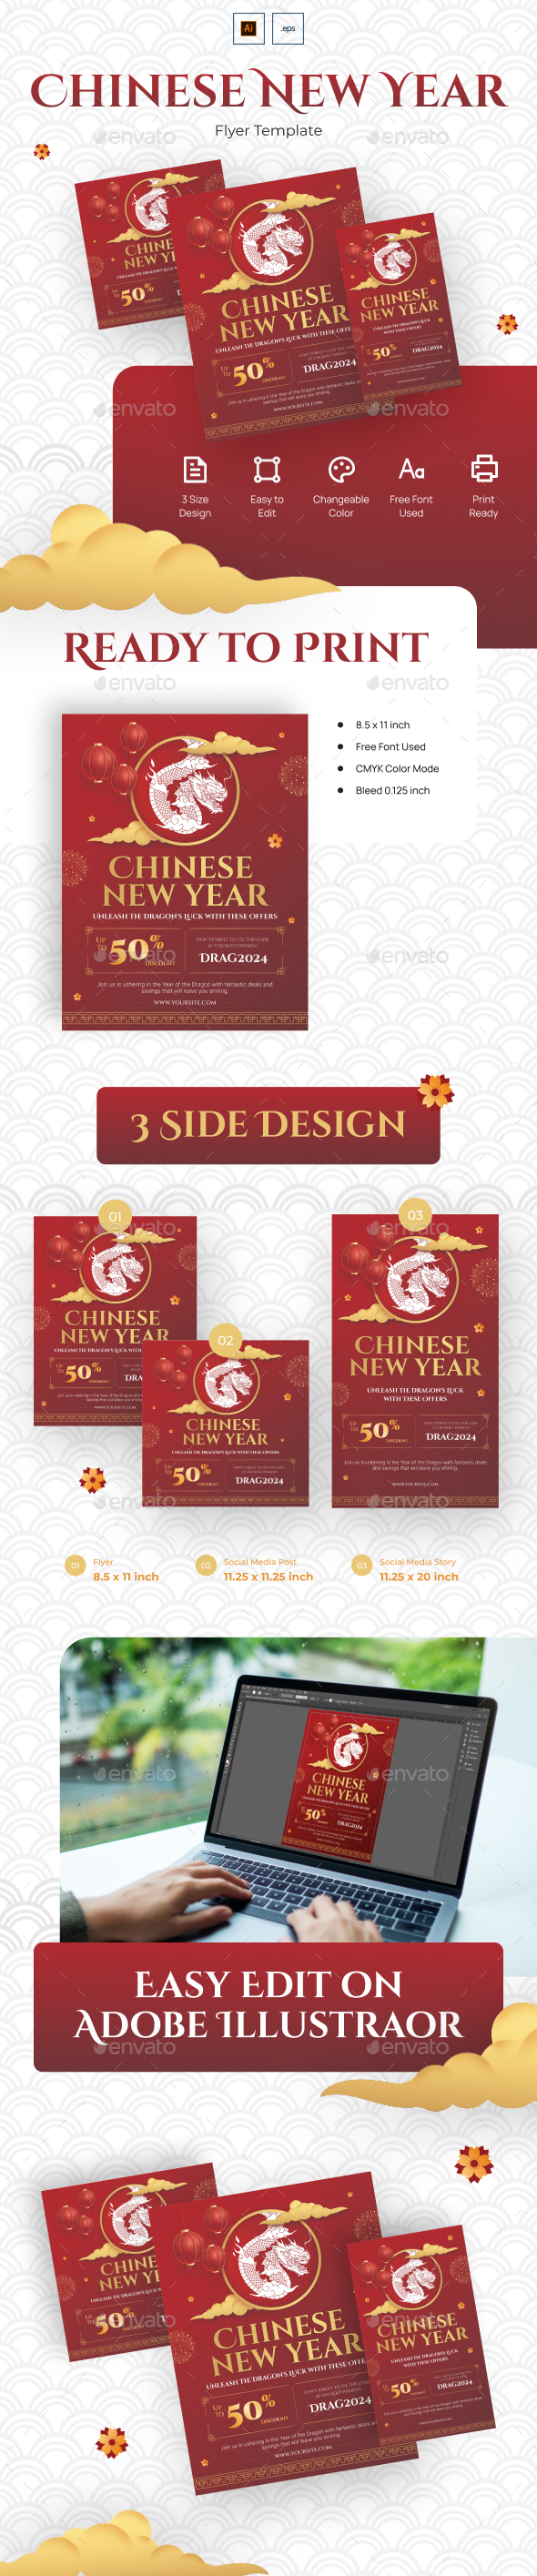 [DOWNLOAD]Chinese Lunar New Year Discount Flyer